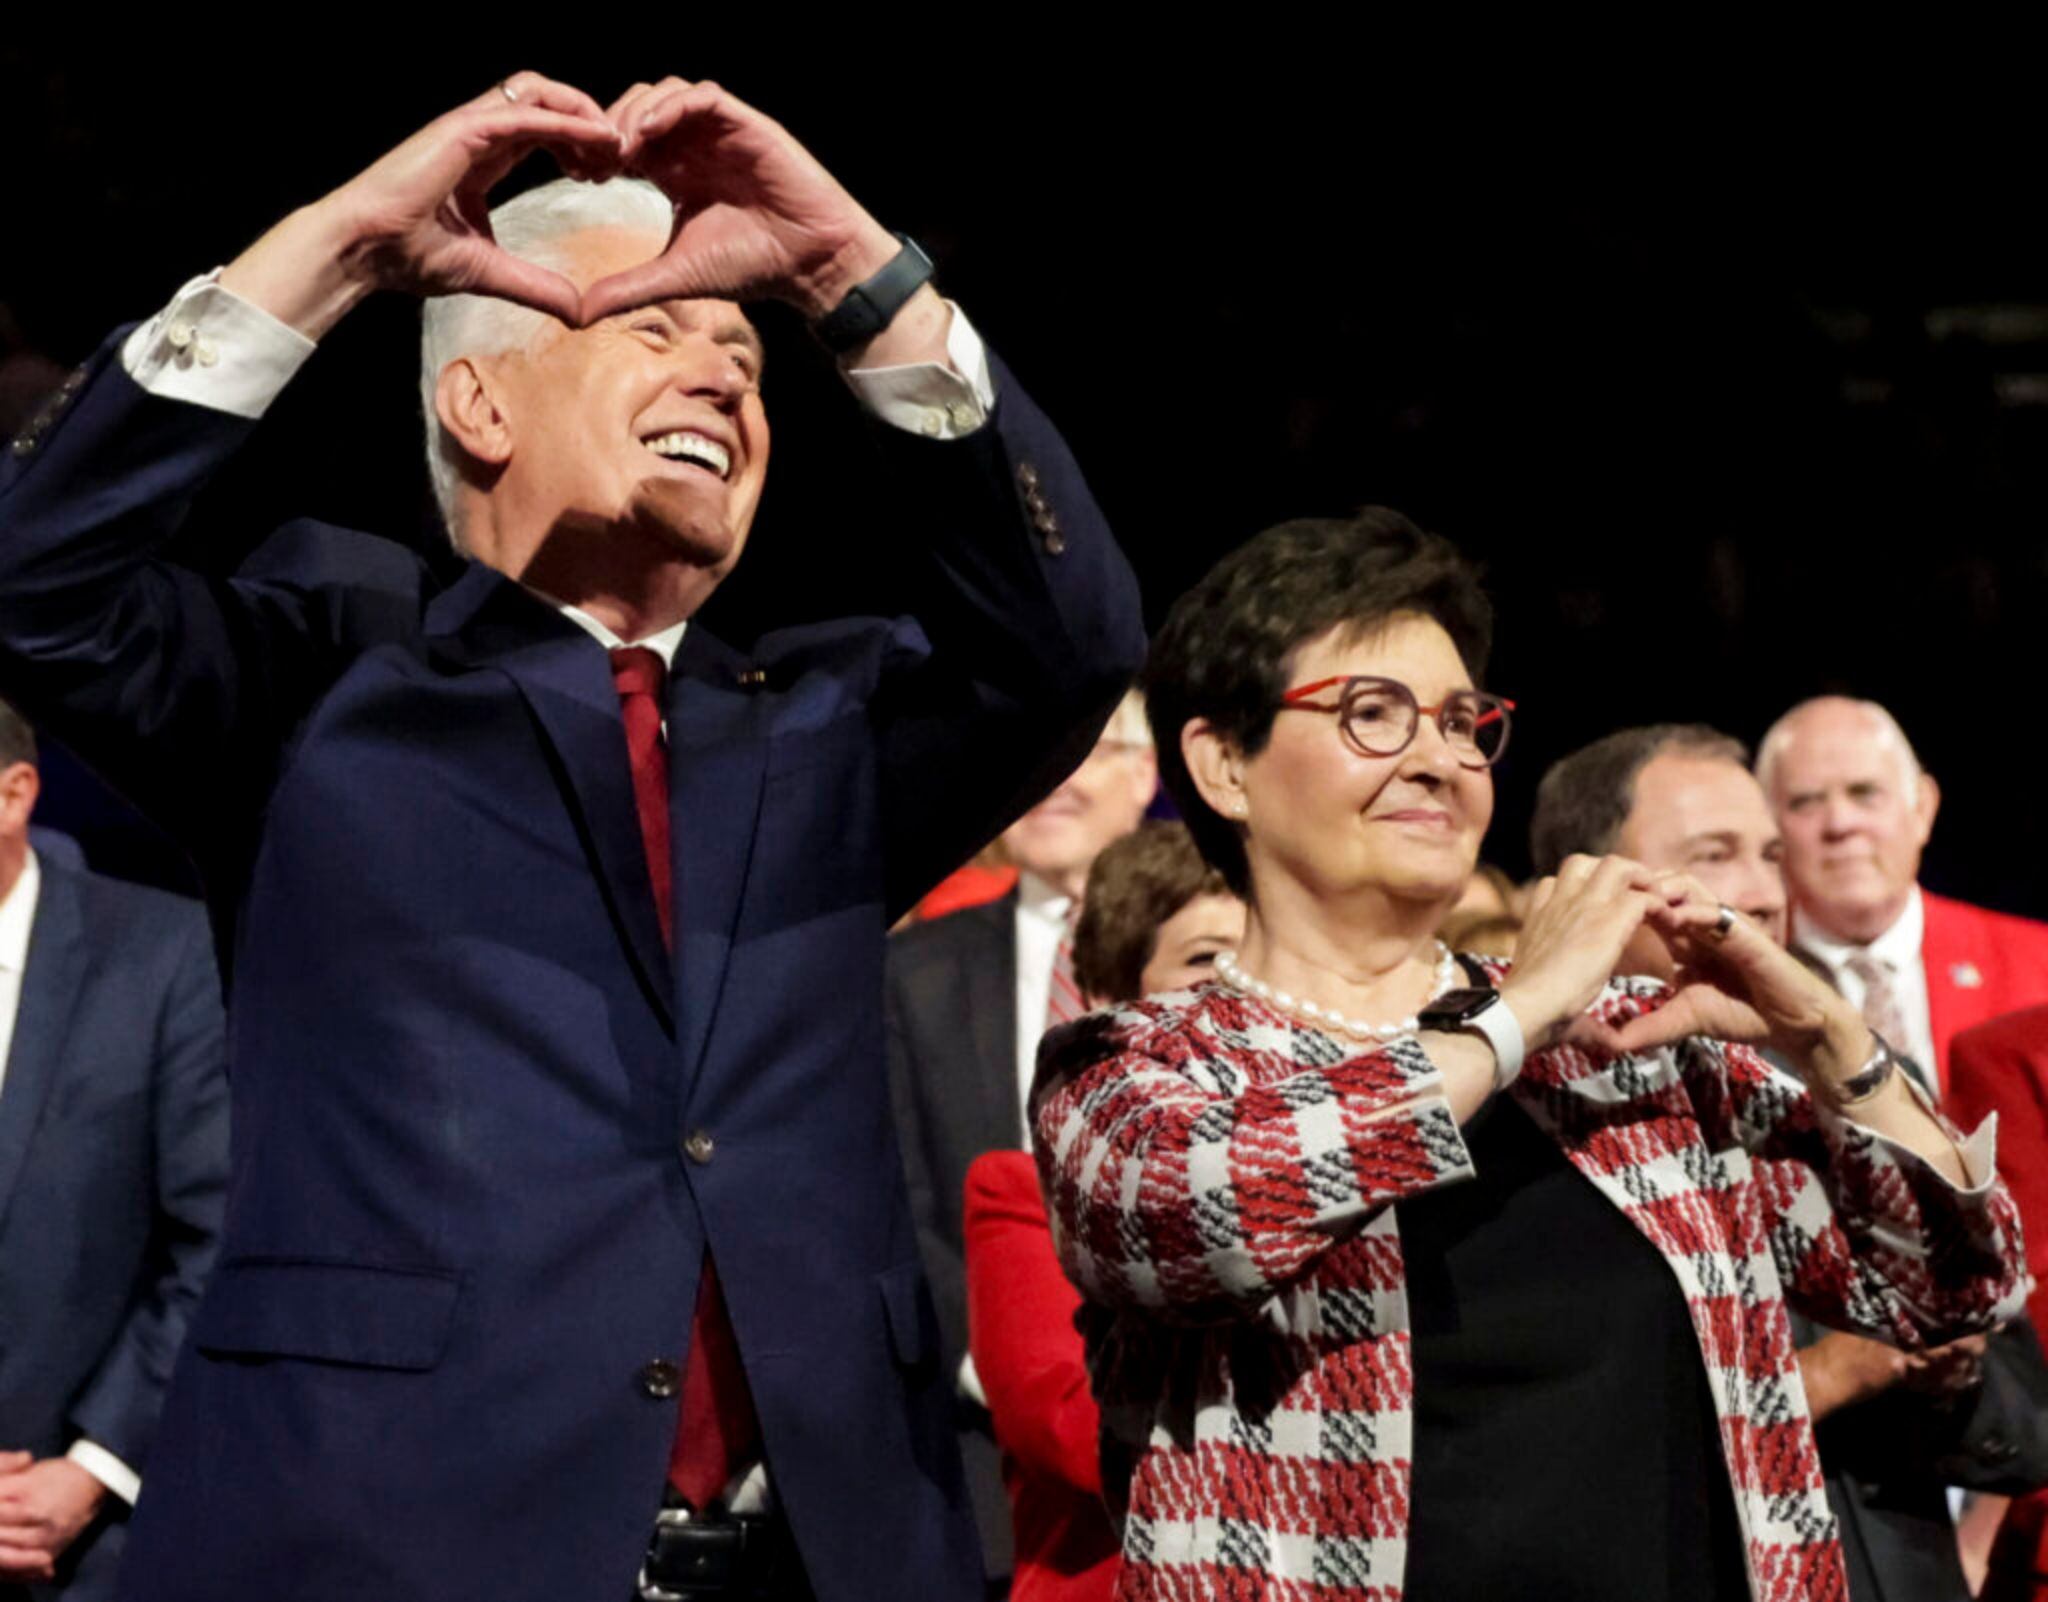 (The Church of Jesus Christ of Latter-day Saints)
Apostle Dieter F. Uchtdorf and his wife, Harriet, flash a heart to the audience during the Patriotic Service of America’s Freedom Festival in the Marriott Center in Provo in 2022.